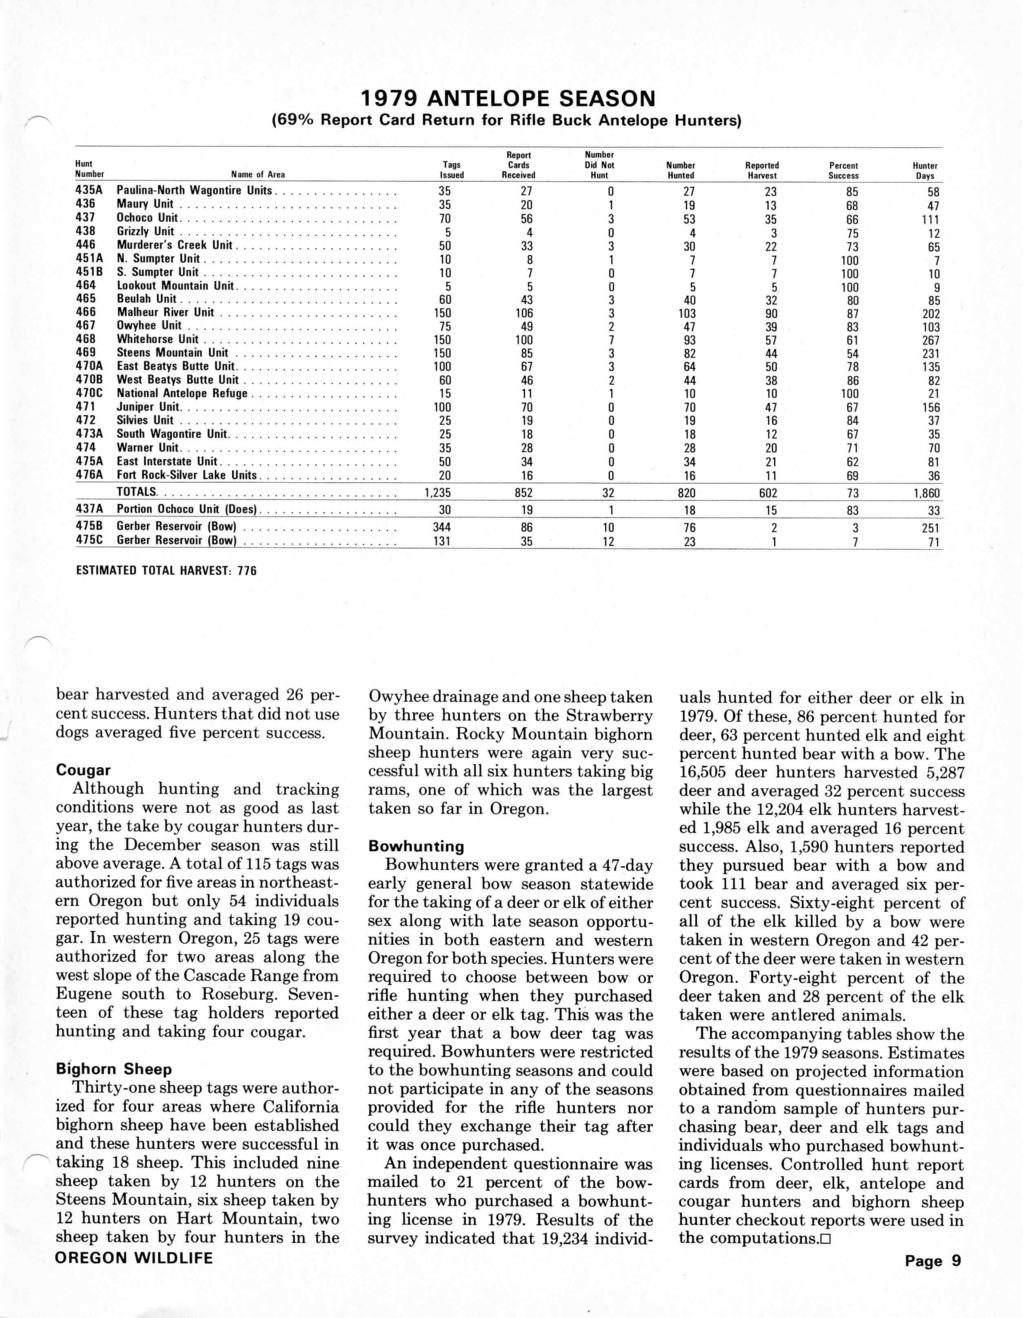 1979 ANTELOPE SEASON (69% Report Card Return for Rifle Buck Antelope Hunters) Hunt Number Name of Area 435A Paulina-North Waguntire Units 436 Maury Unit 431 Ochoco Unit 438 Grizzly Unit 446 Murderers